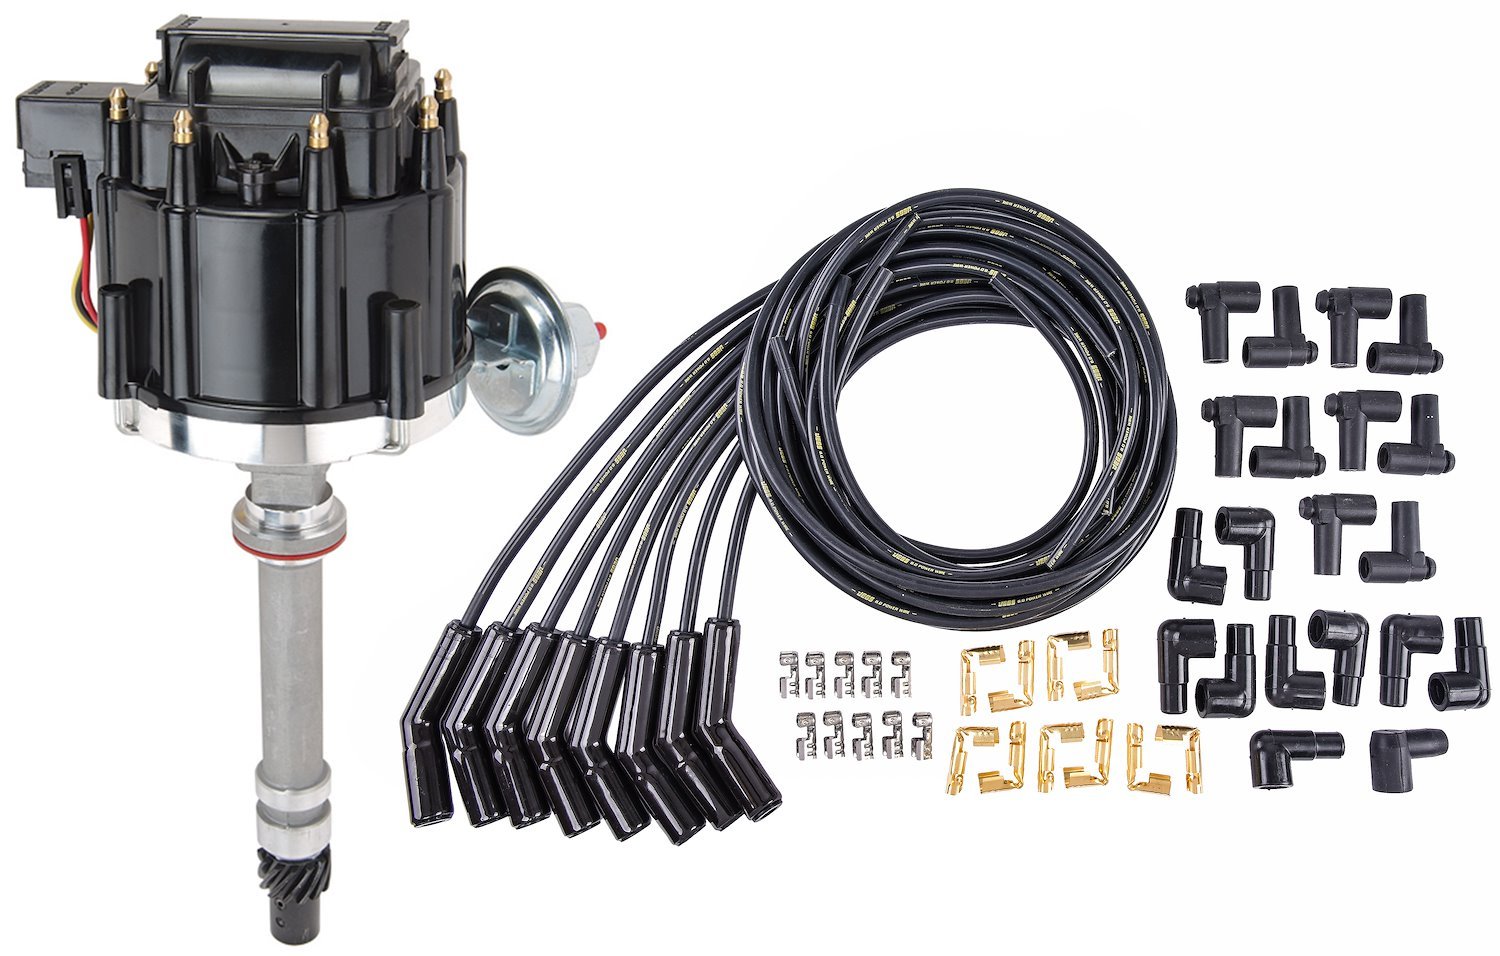 HEI Distributor Kit For Small Block & Big Block Chevy with 8 mm Black HI-Temp Wires & 135-Degree Ceramic Boots